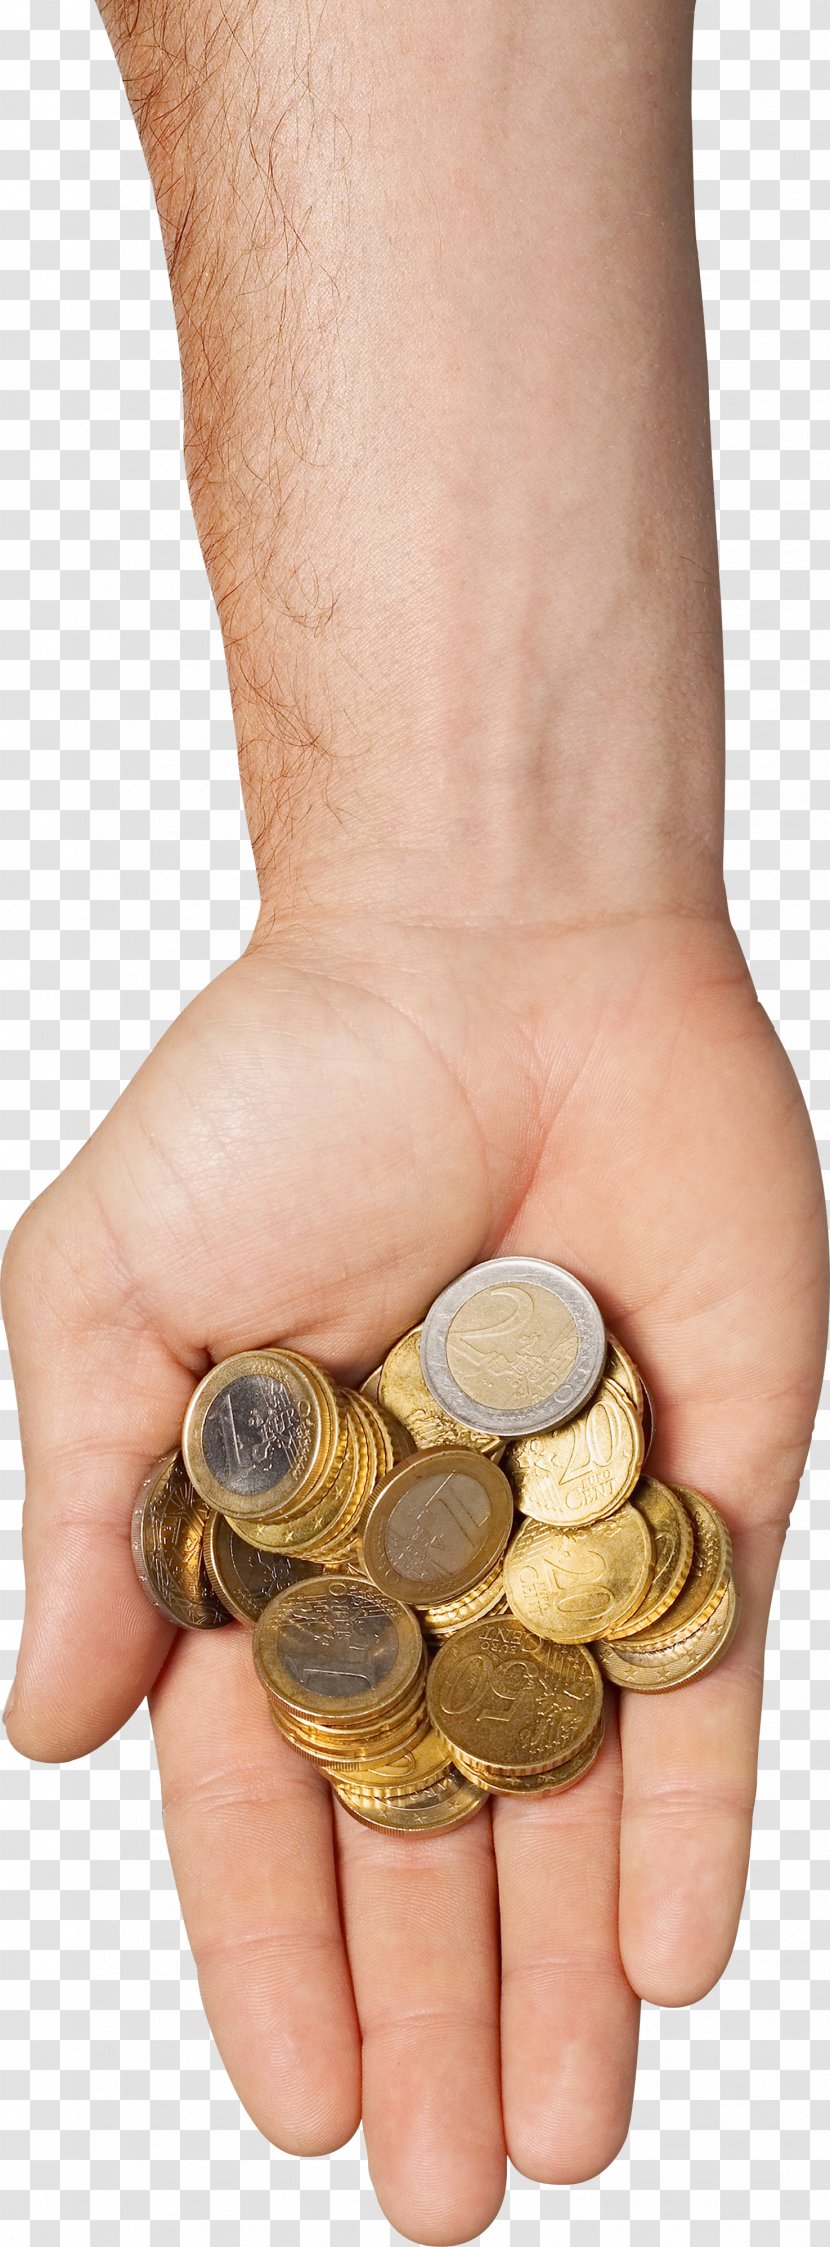 Money Coin - In Hand Image Transparent PNG